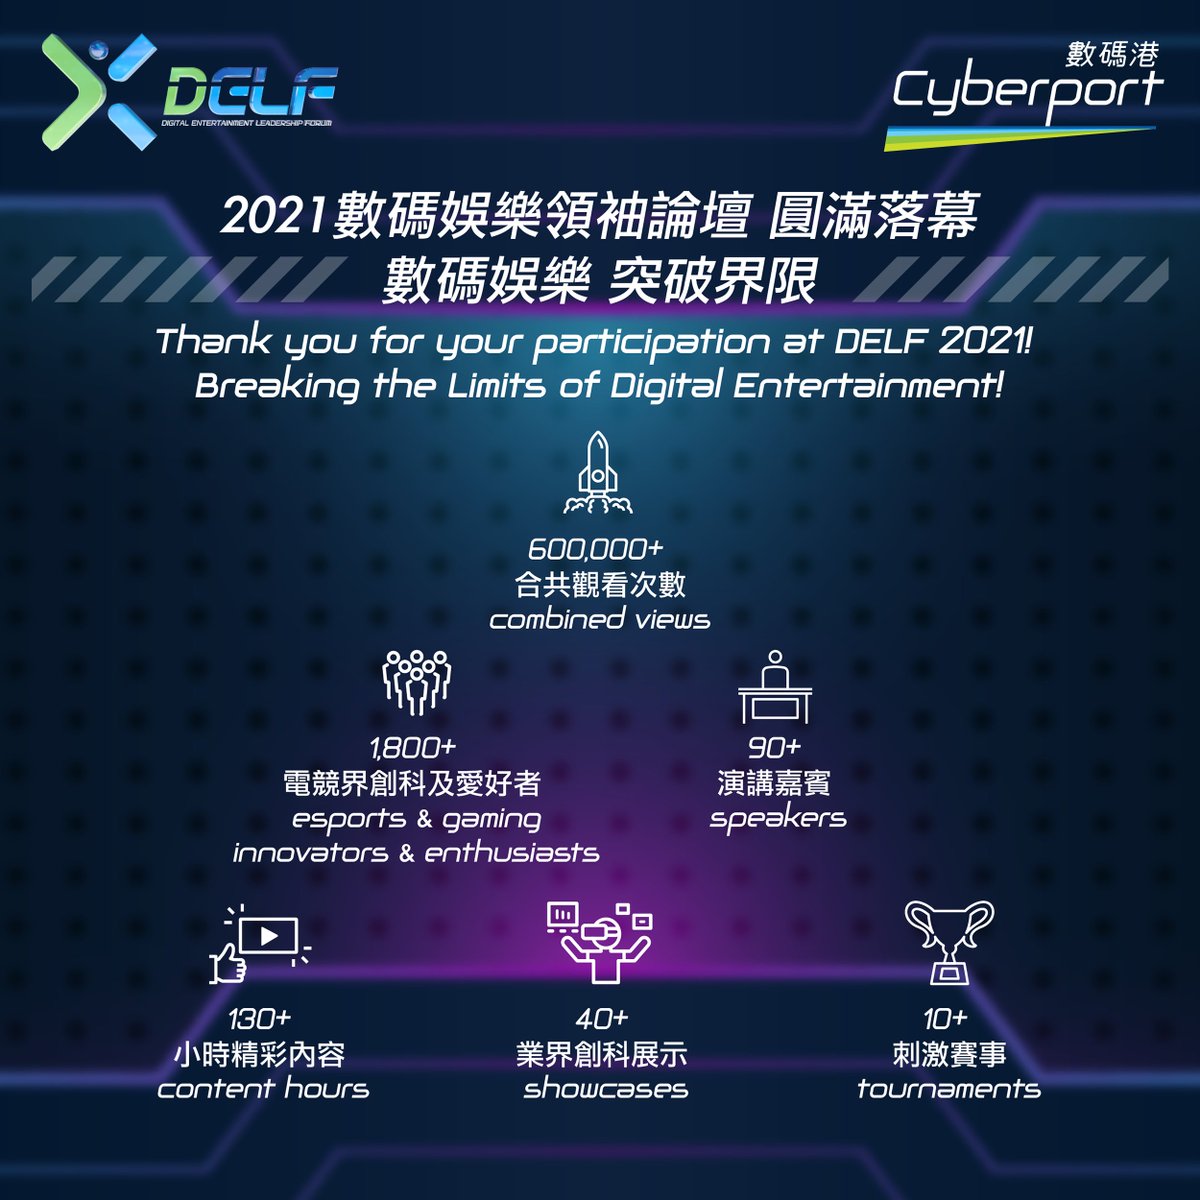 #DELF2021 has been concluded successfully with 1800+ participants and 600k+ views! Thanks all for your great support! See you next year! 24h on-demand videos are available from now till 10 Jan 2022 on: bit.ly/3F0v6jj #Cyberport